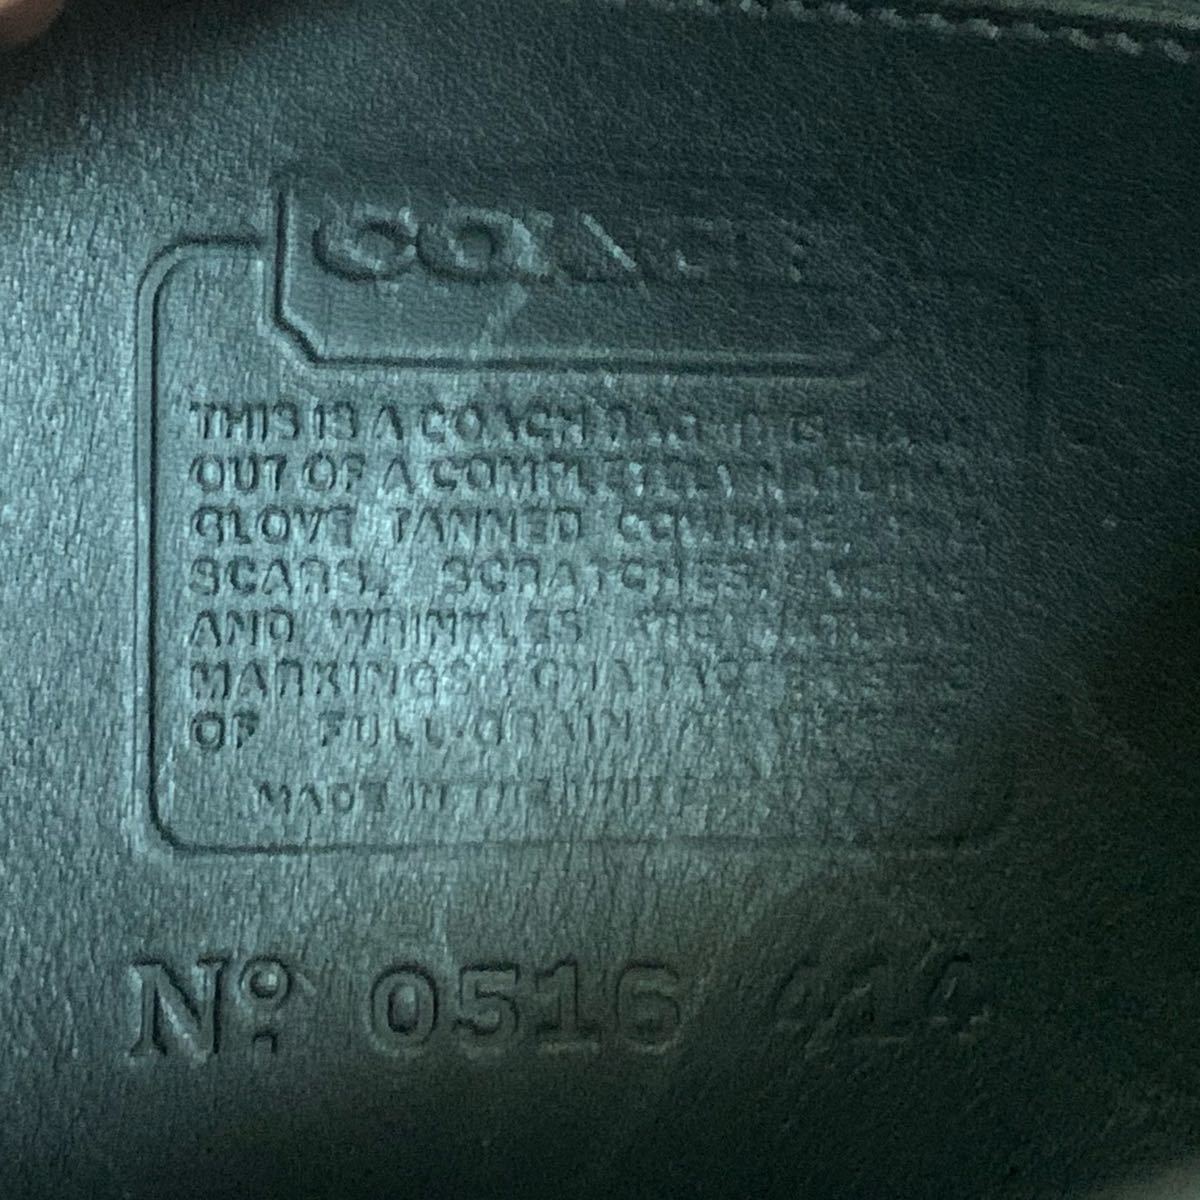 OLD COACH オールドコーチ COACH VINTAGE コーチ ヴィンテージ MADE IN USA USA製 No.0516 414 セカンドバッグ クラッチバッグ アーカイブ_画像7